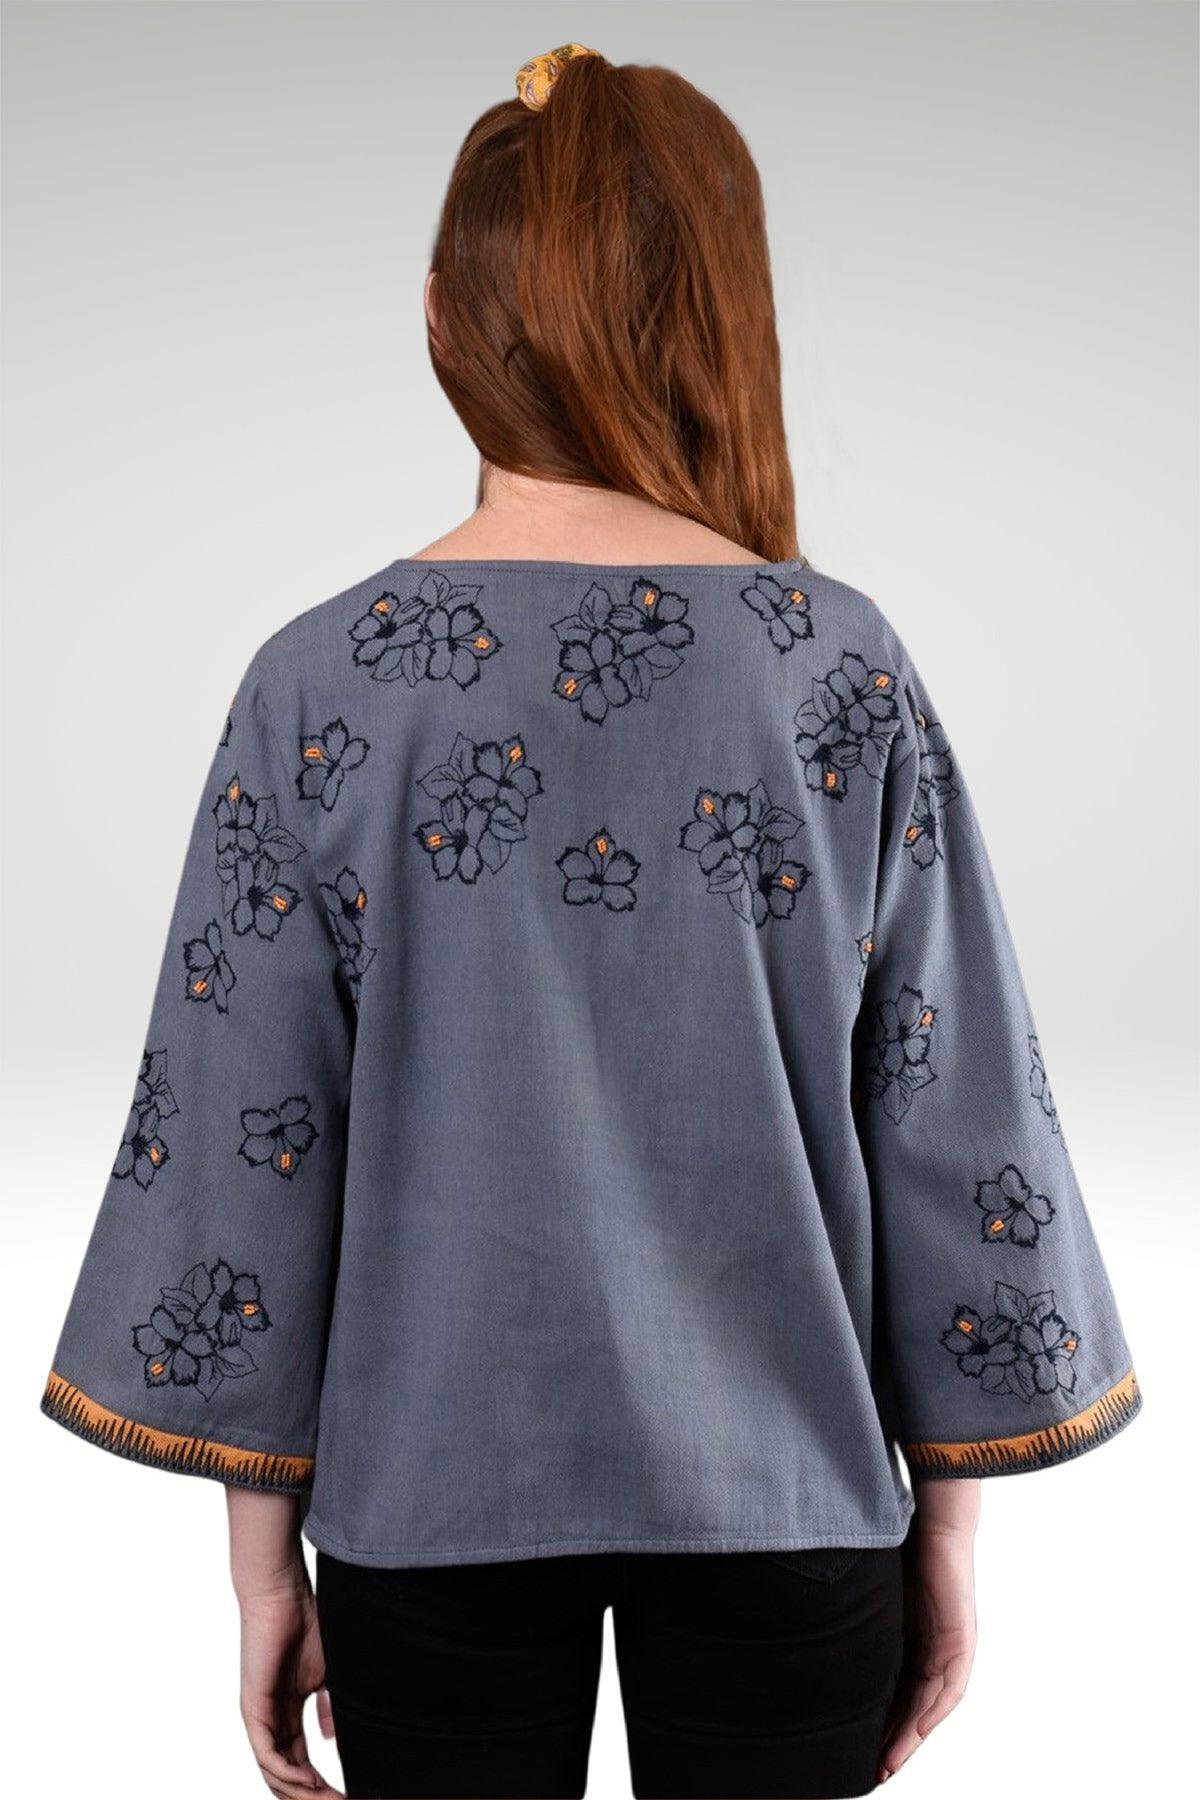 ARABELLA FLORAL EMBROIDERED TOP - zohaonline- back view on model